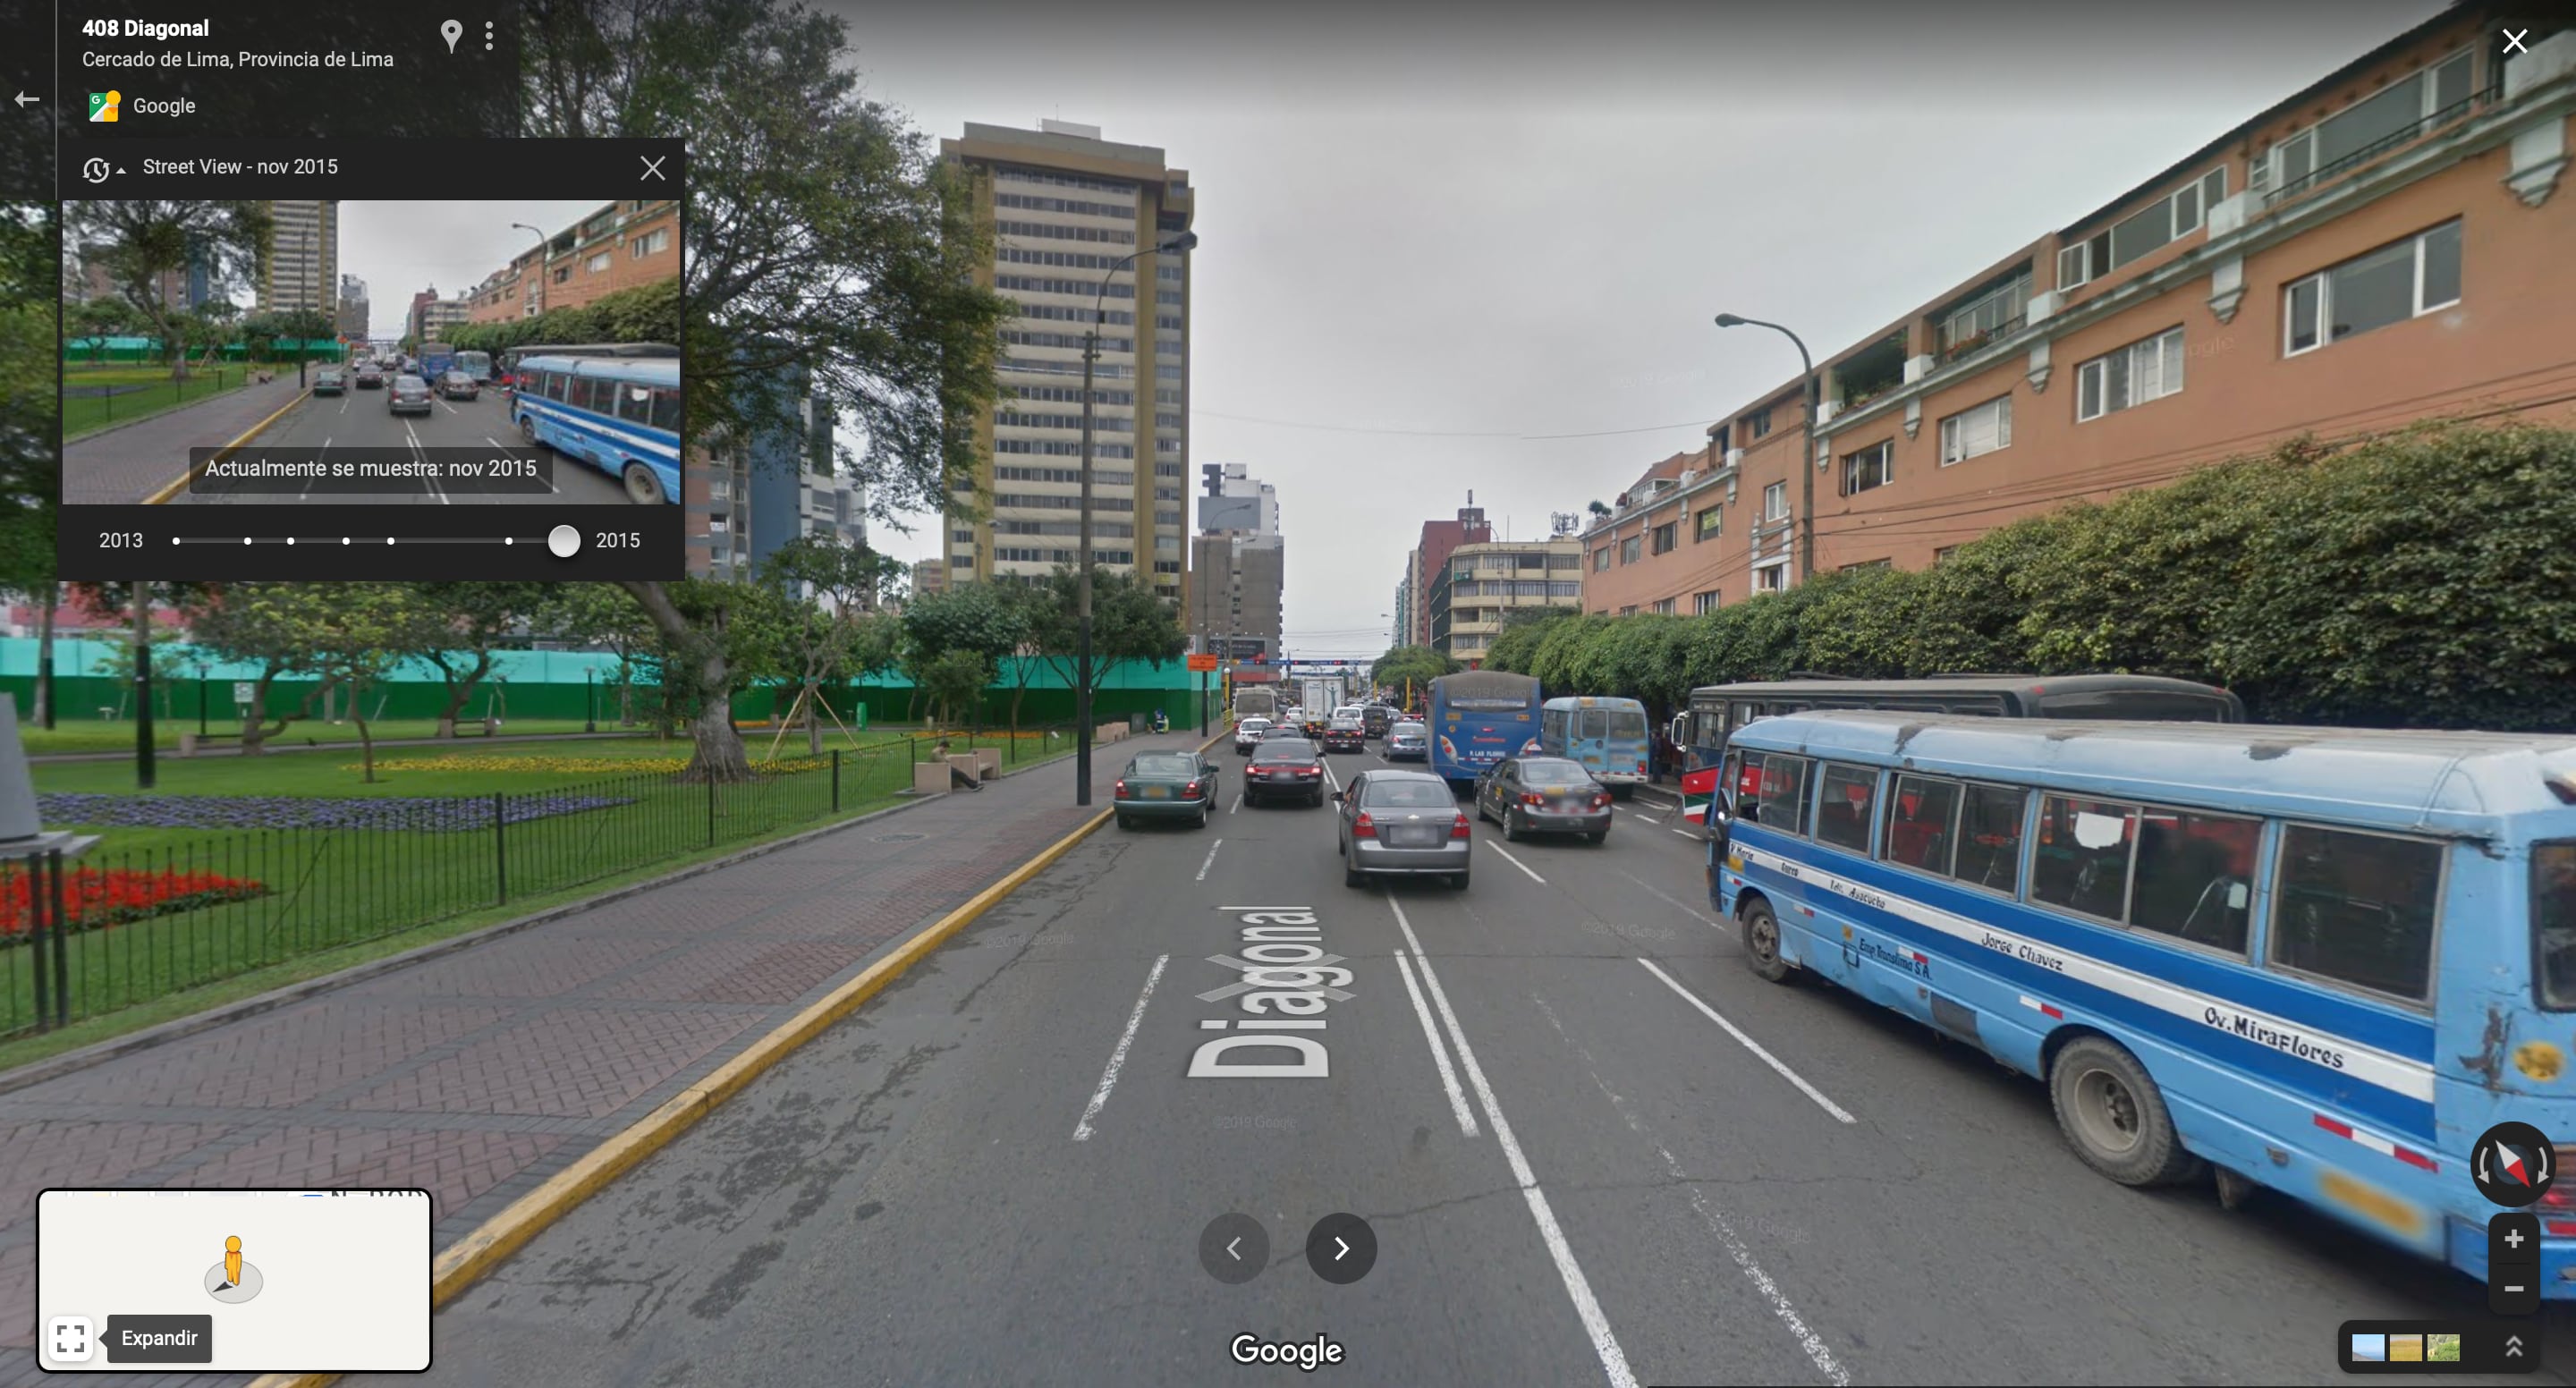 Kennedy Park in the city of Lima, Peru seen on Google Maps in 2015. (photo: Google Maps/Jose Arana)